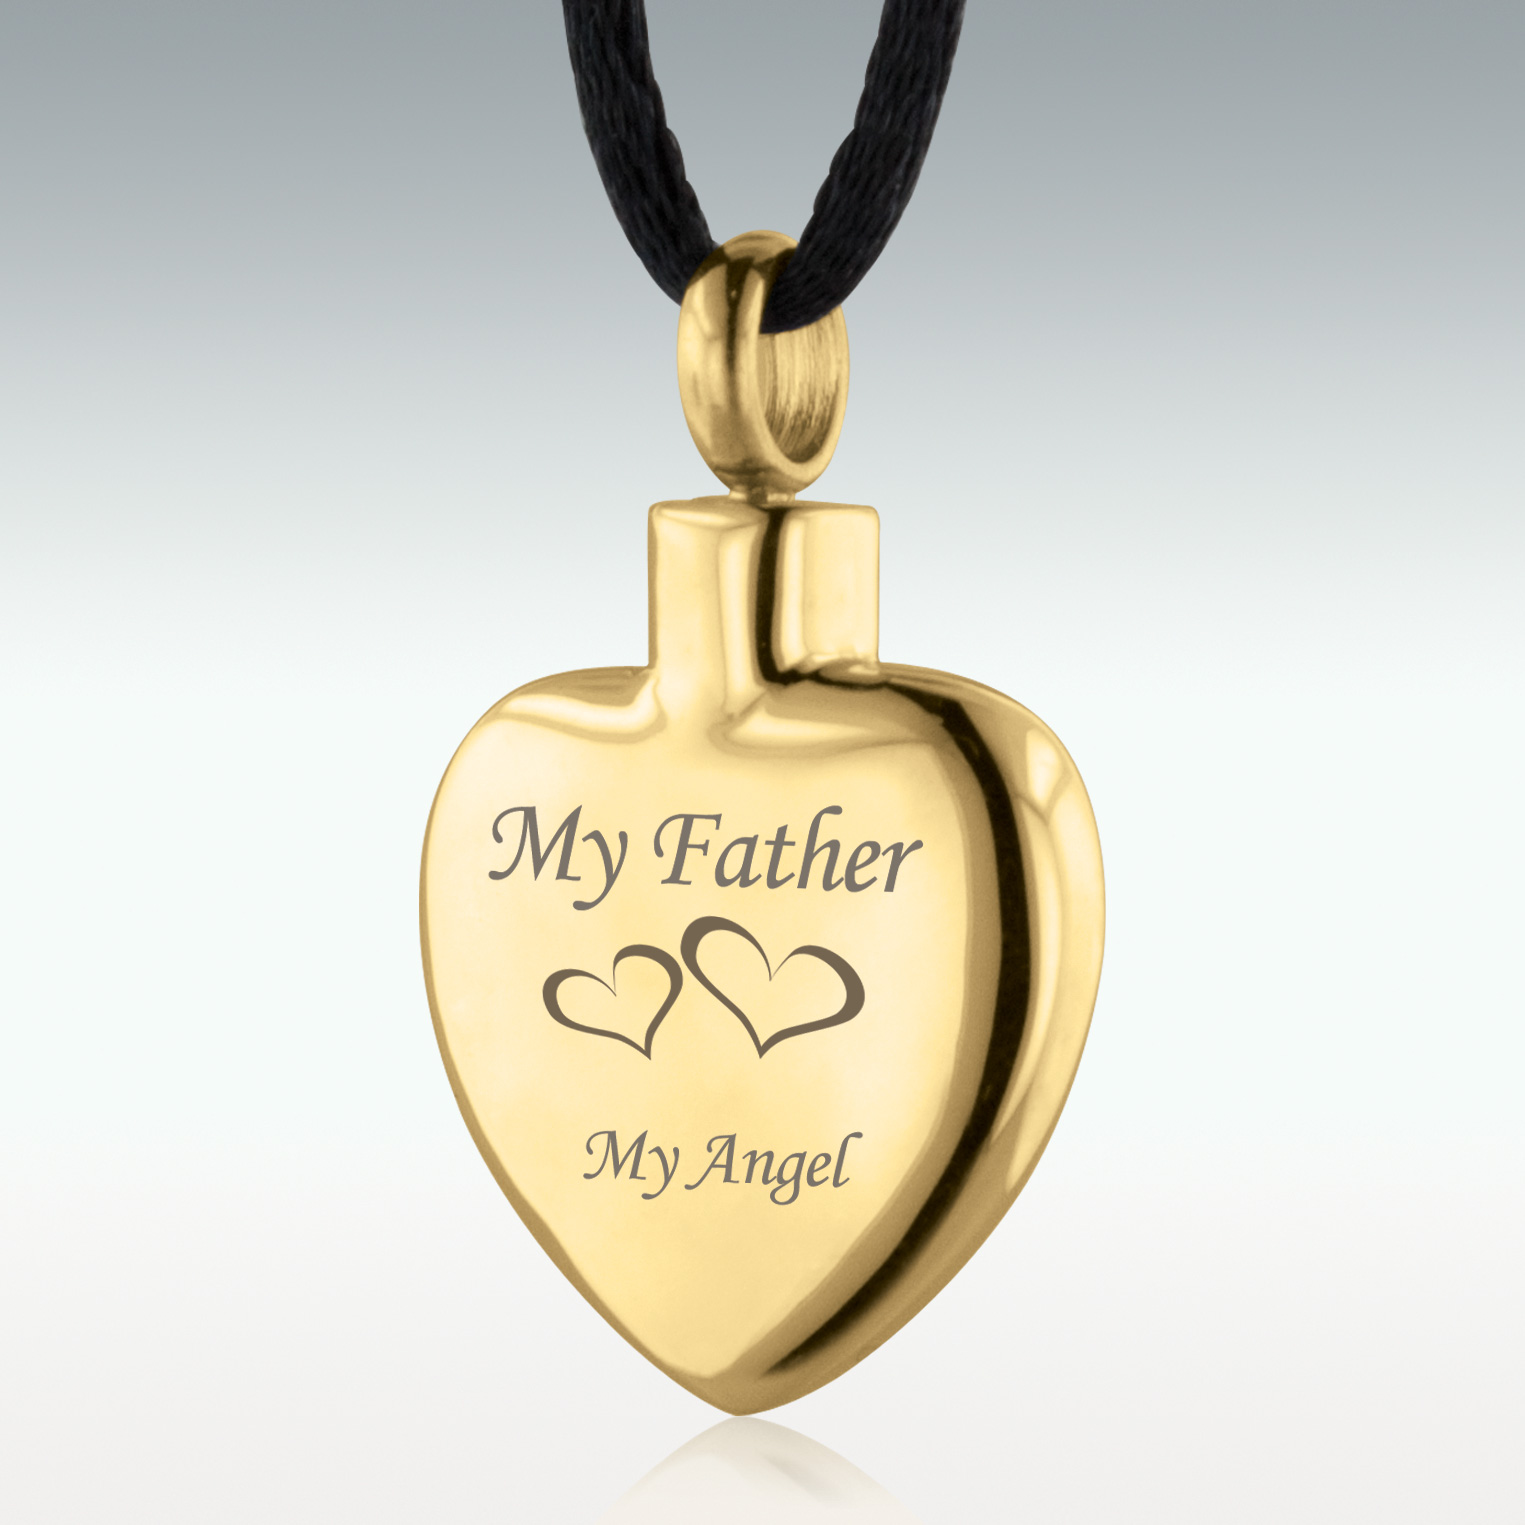 mingkejw Cremation Jewelry Angel Wing Heart Urn Necklace for Ashes for  Women Men Memorial Keepsake Human Pet Ashes Pendant,Dad : Amazon.ca:  Clothing, Shoes & Accessories